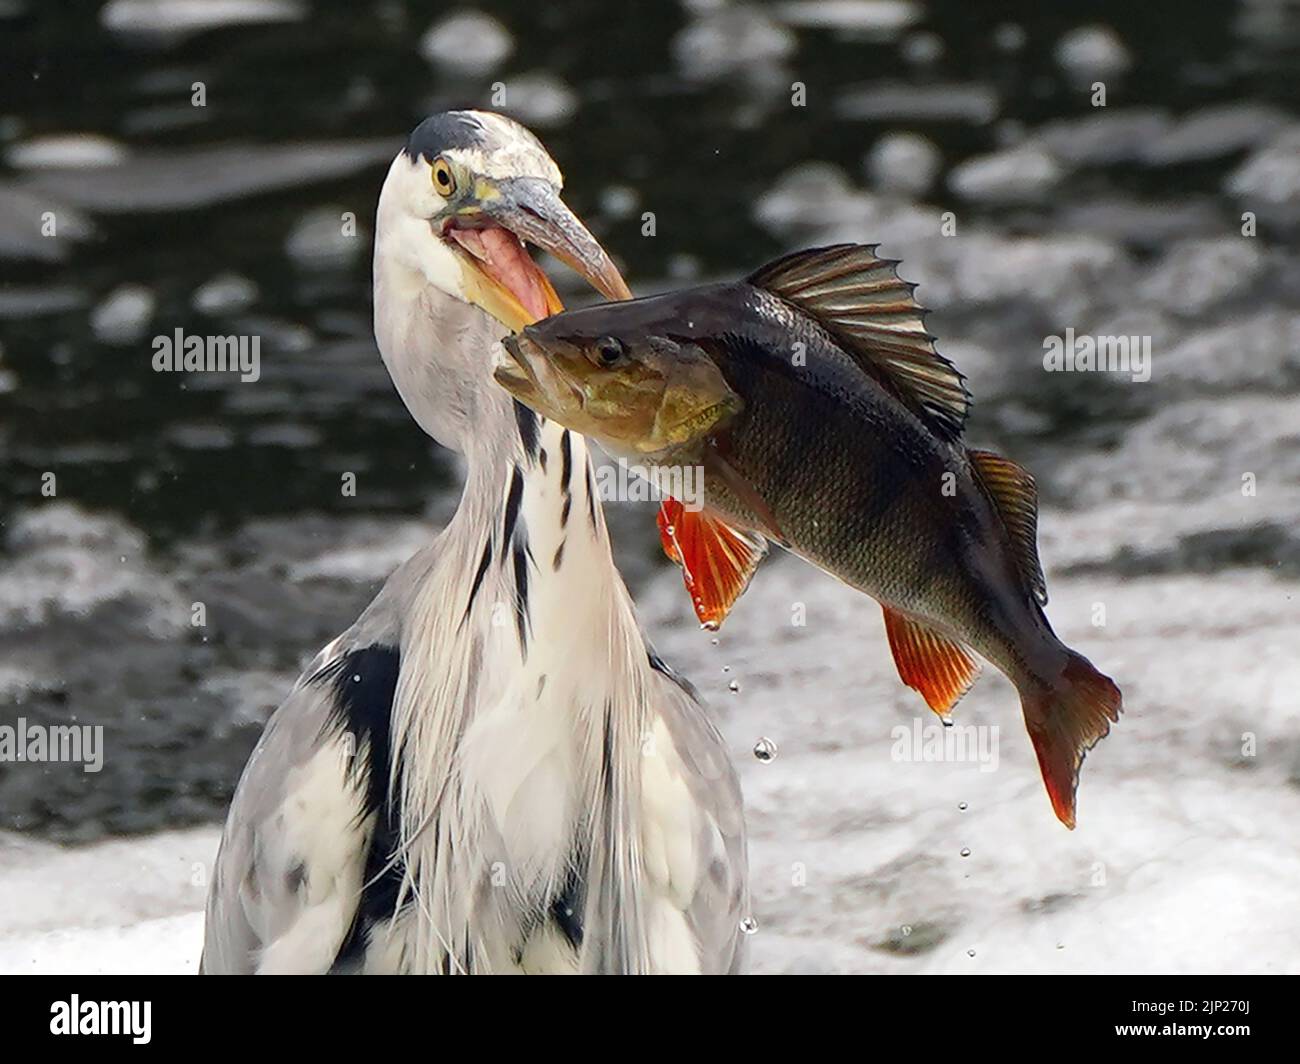 A herring with a perch fish in its mouth in the River Barrow, Carlow. Stock Photo